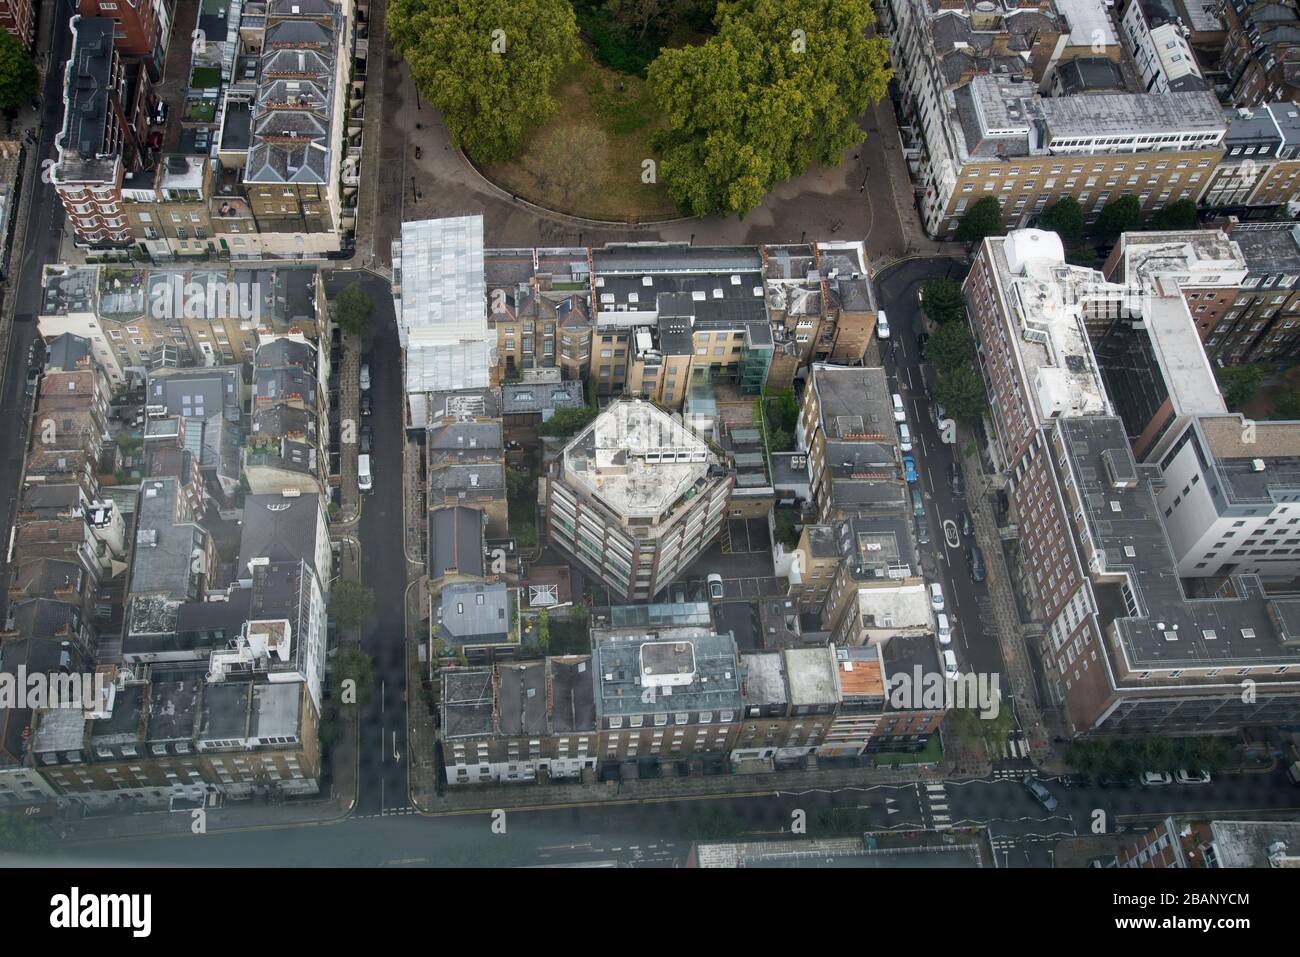 Aerial View of County House Conway Mews Fitzroy Square Conway Street from the BT Tower, 60 Cleveland St, Fitzrovia, London W1T 4JZ Stock Photo